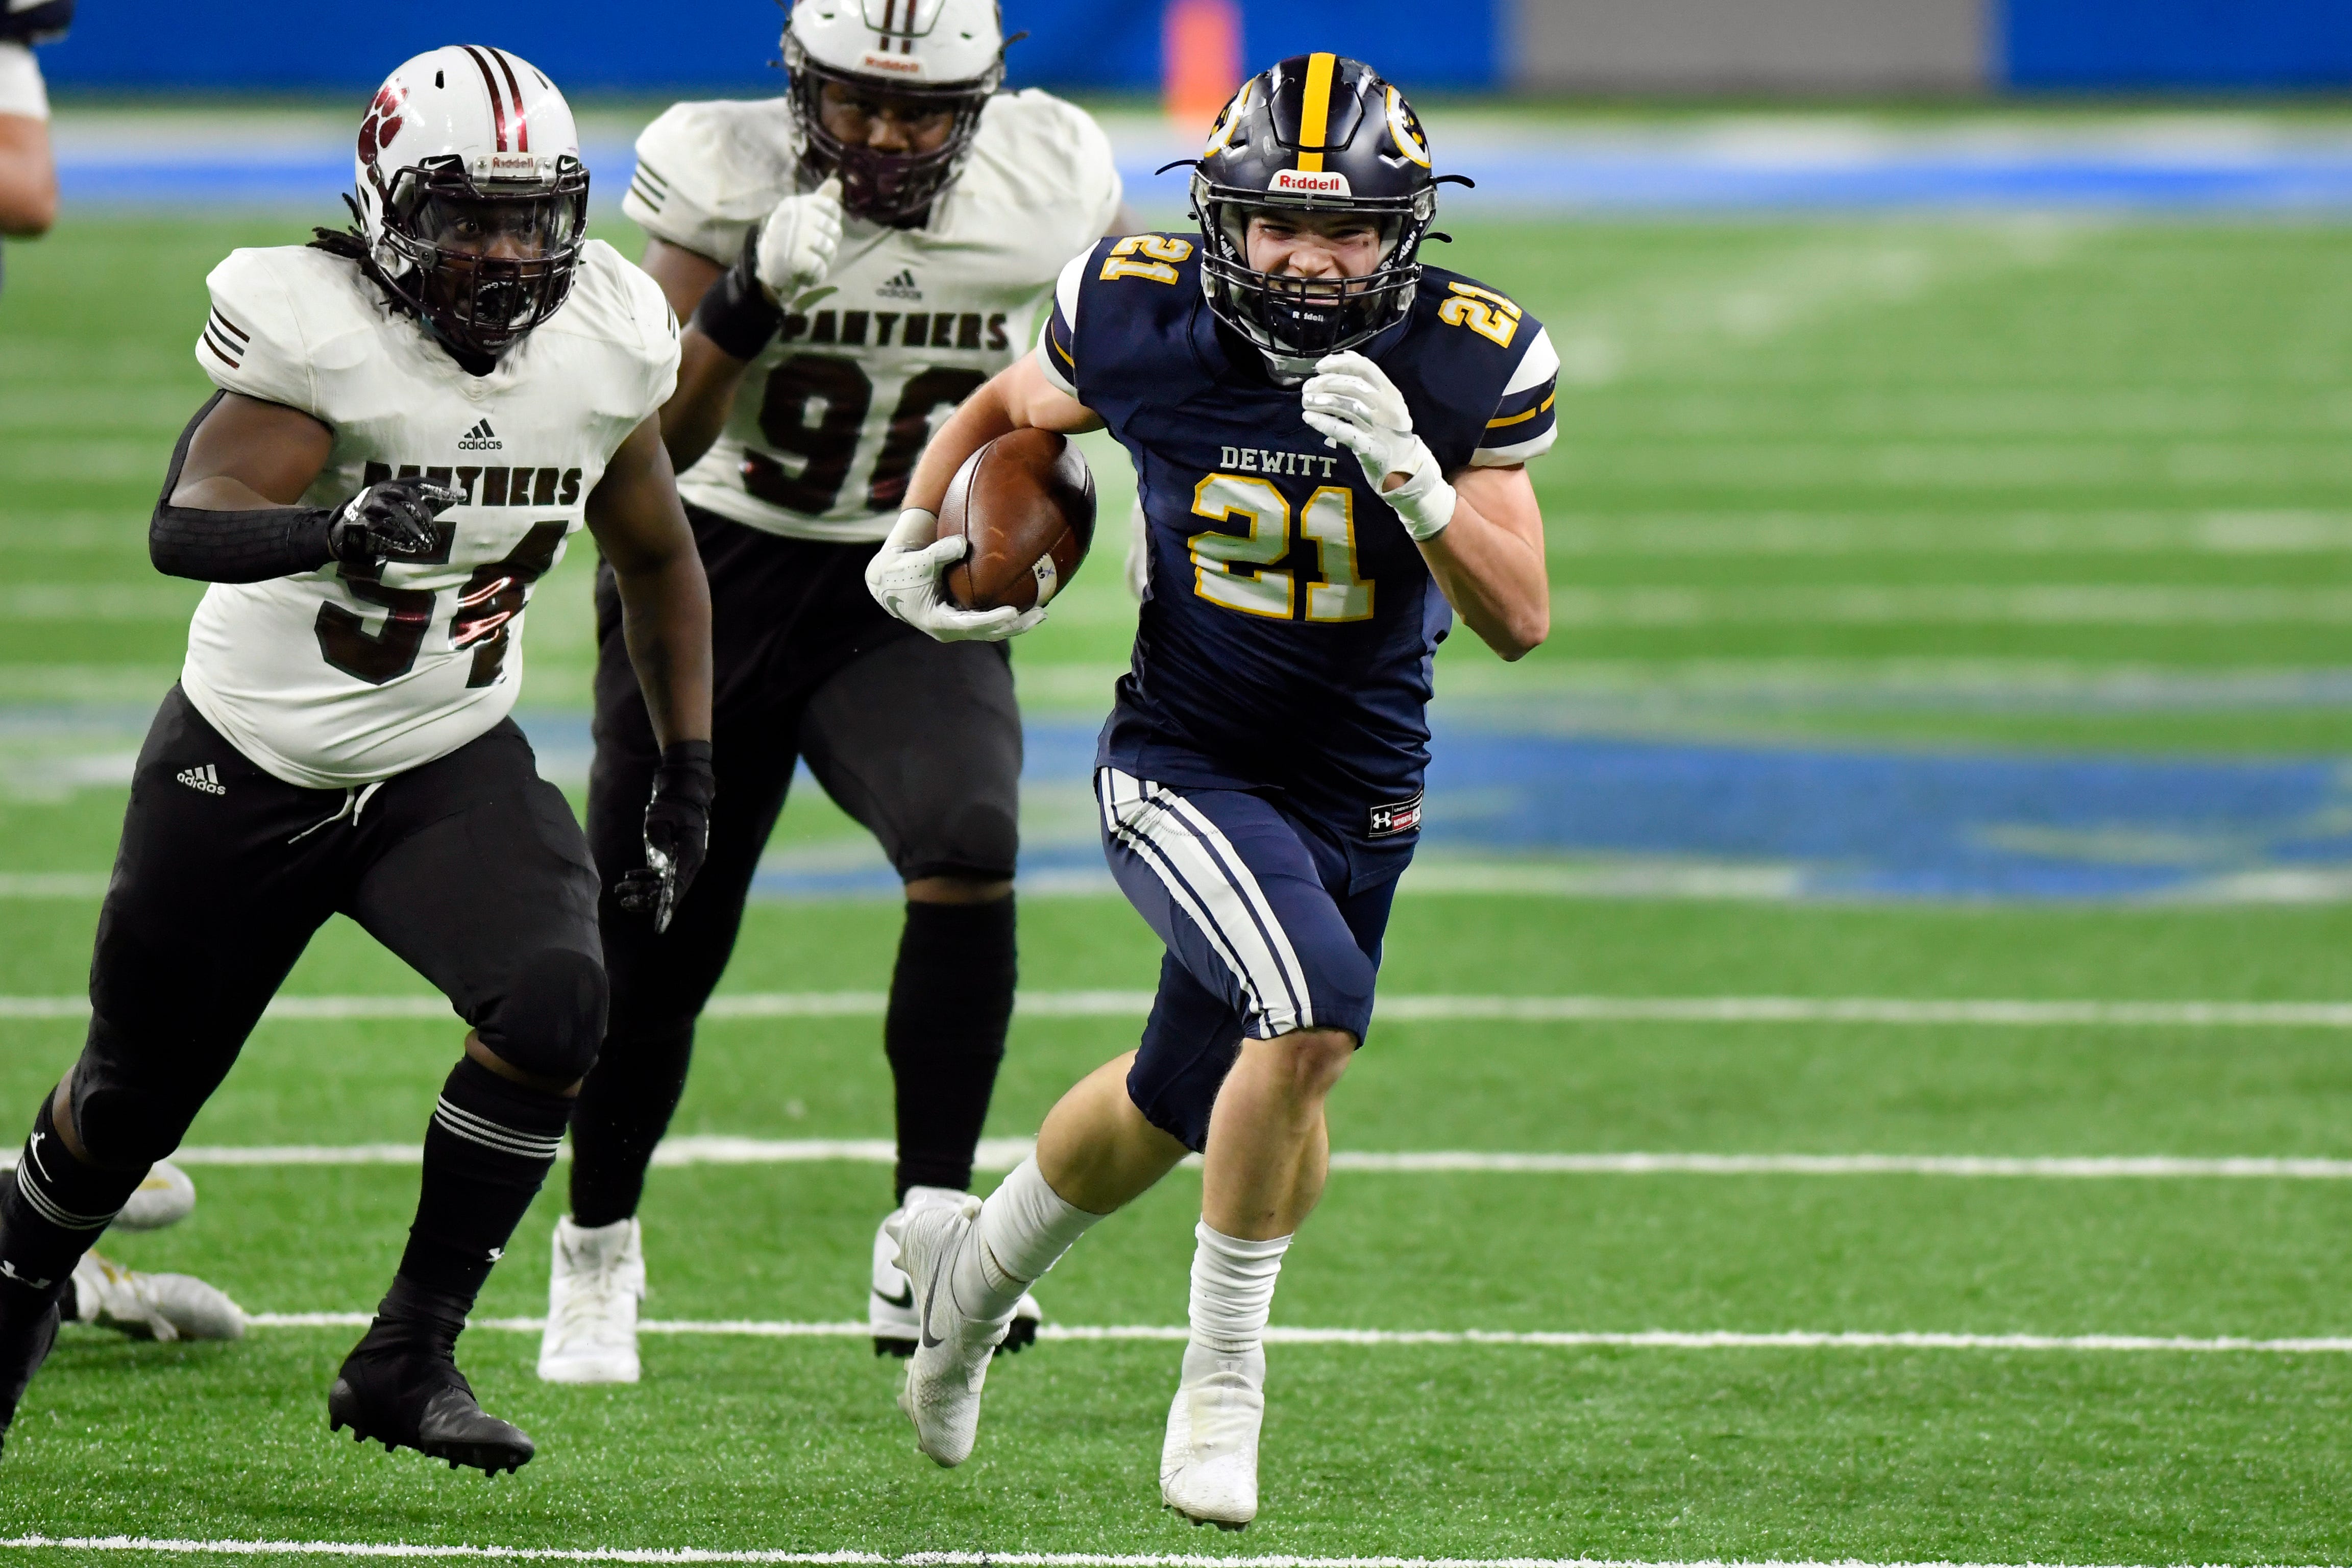 DeWitt wide receiver Bryce Debri breaks away from the River Rouge defense for a touchdown in the third quarter.